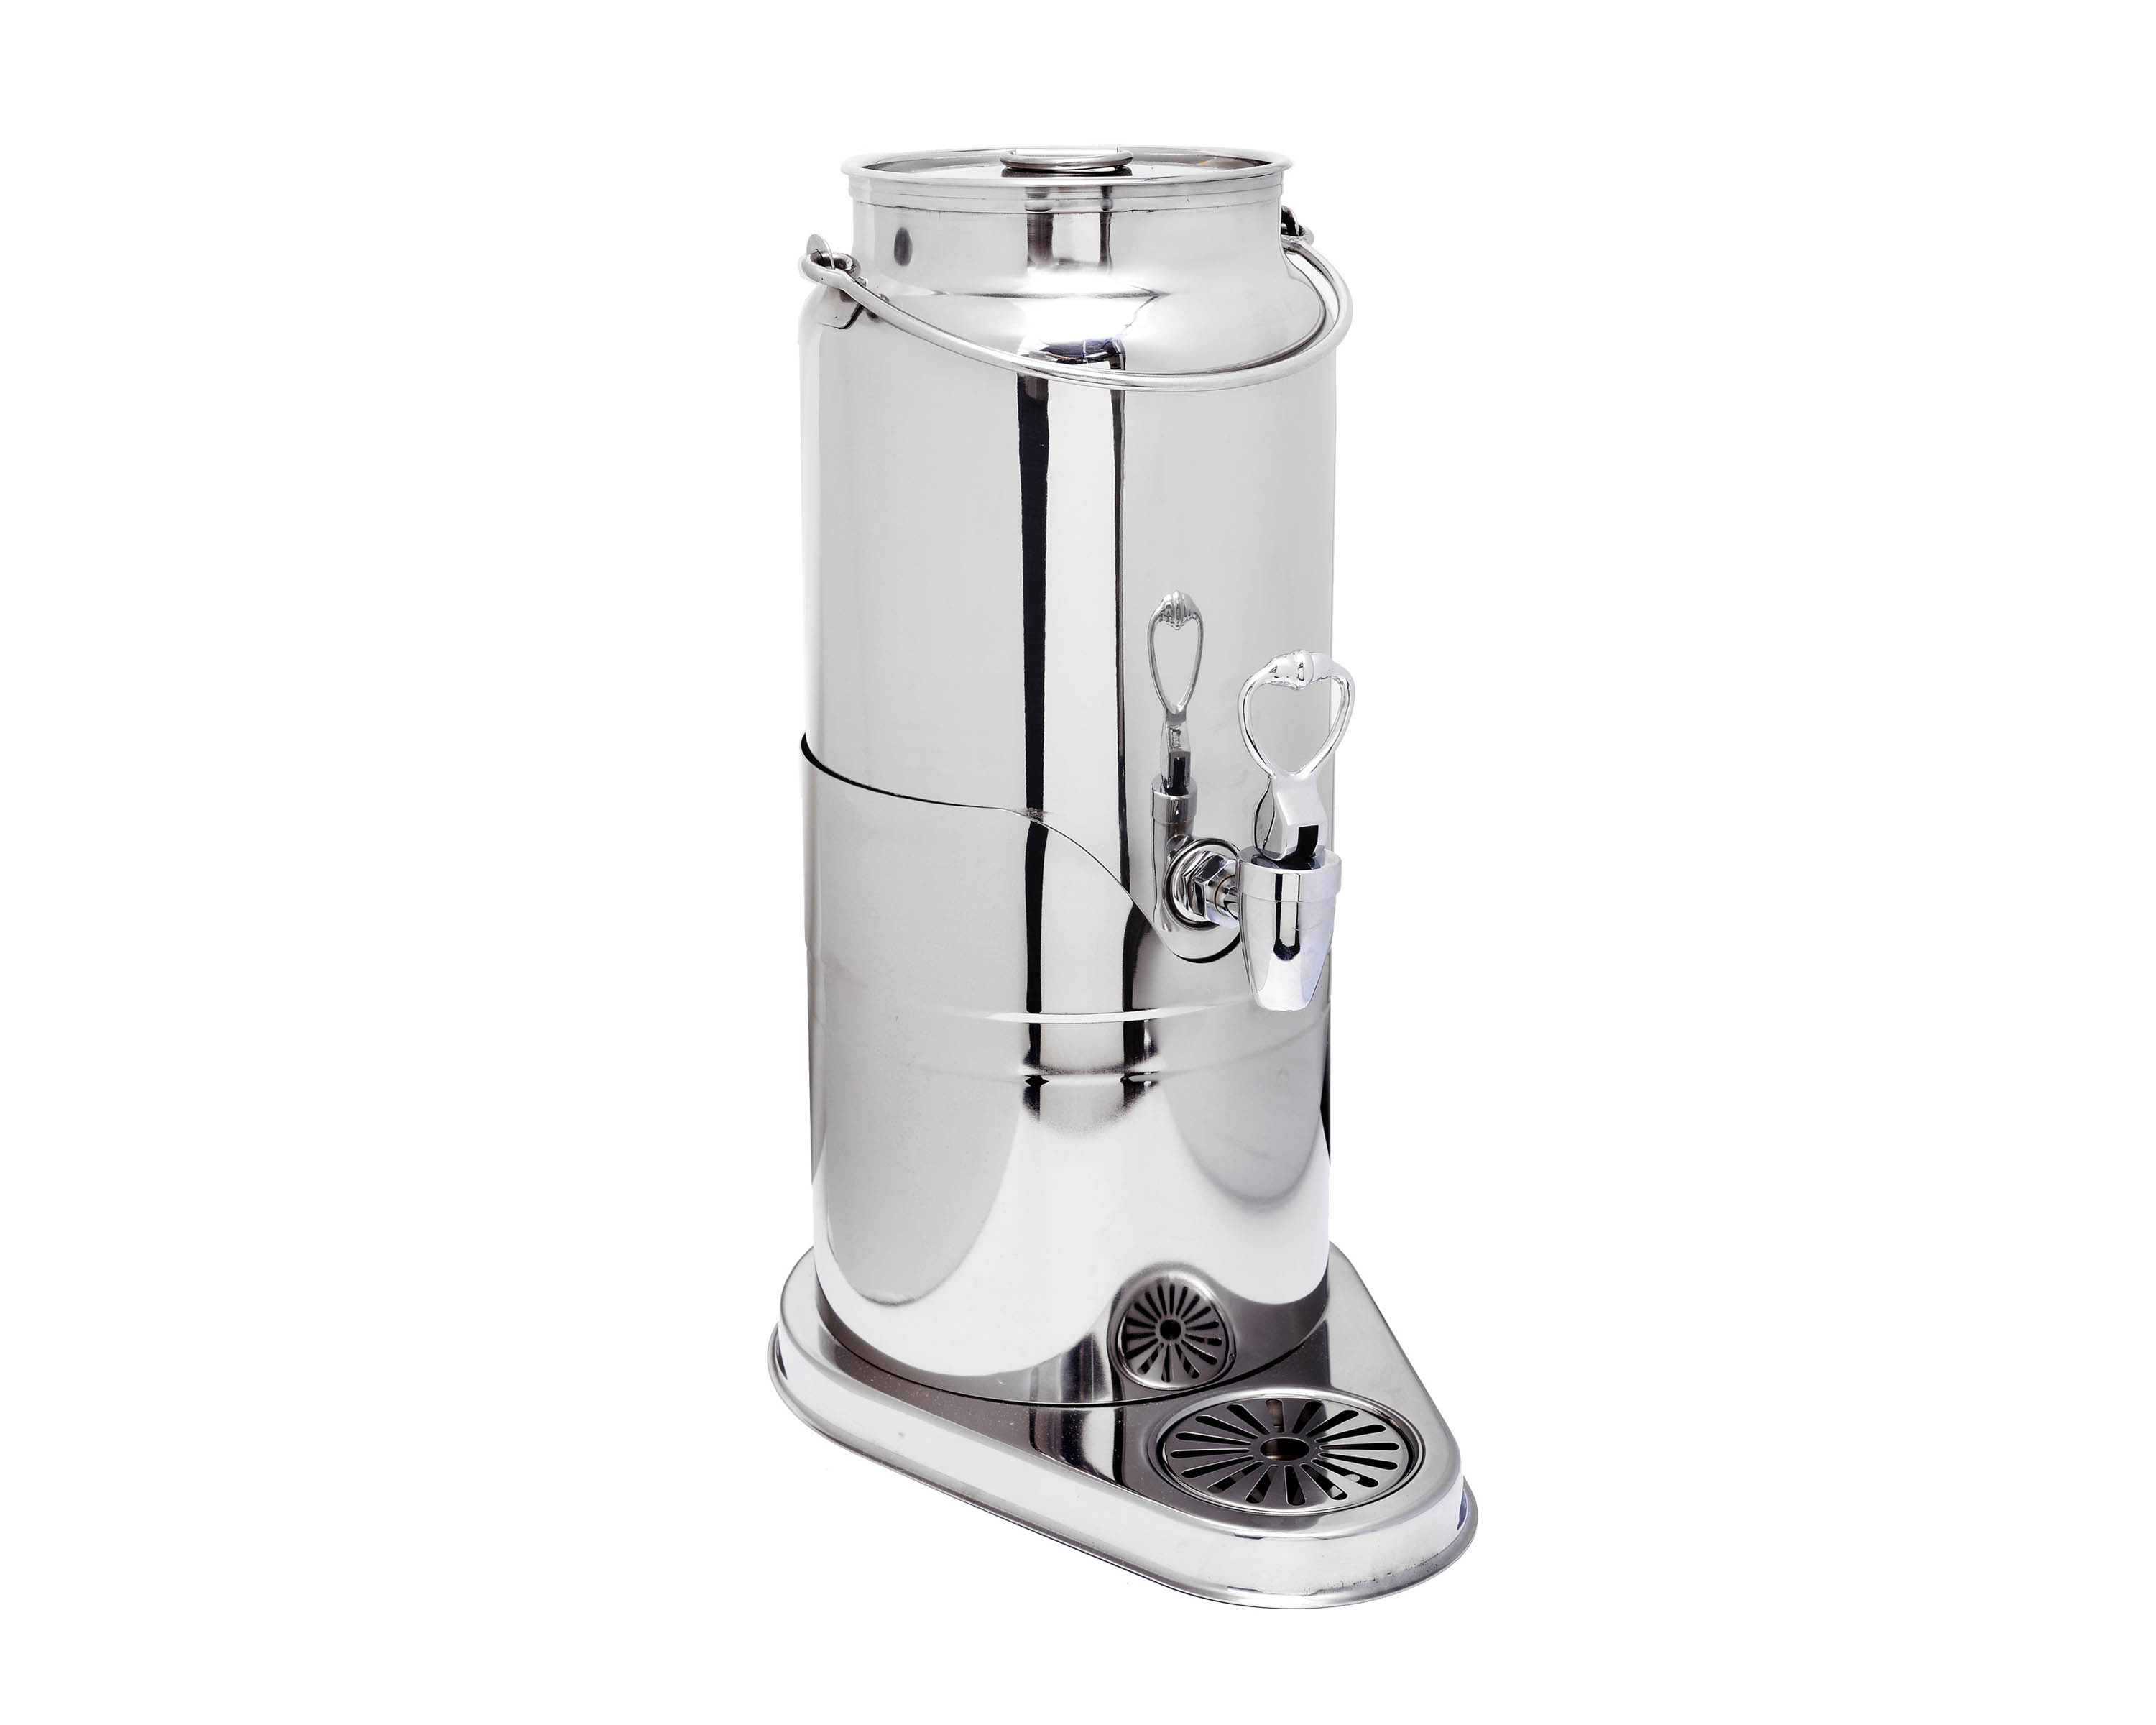 3 Gallon Beverage Dispenser - Stylish Stainless Steel - Hot/Cold Drinks  Coffee